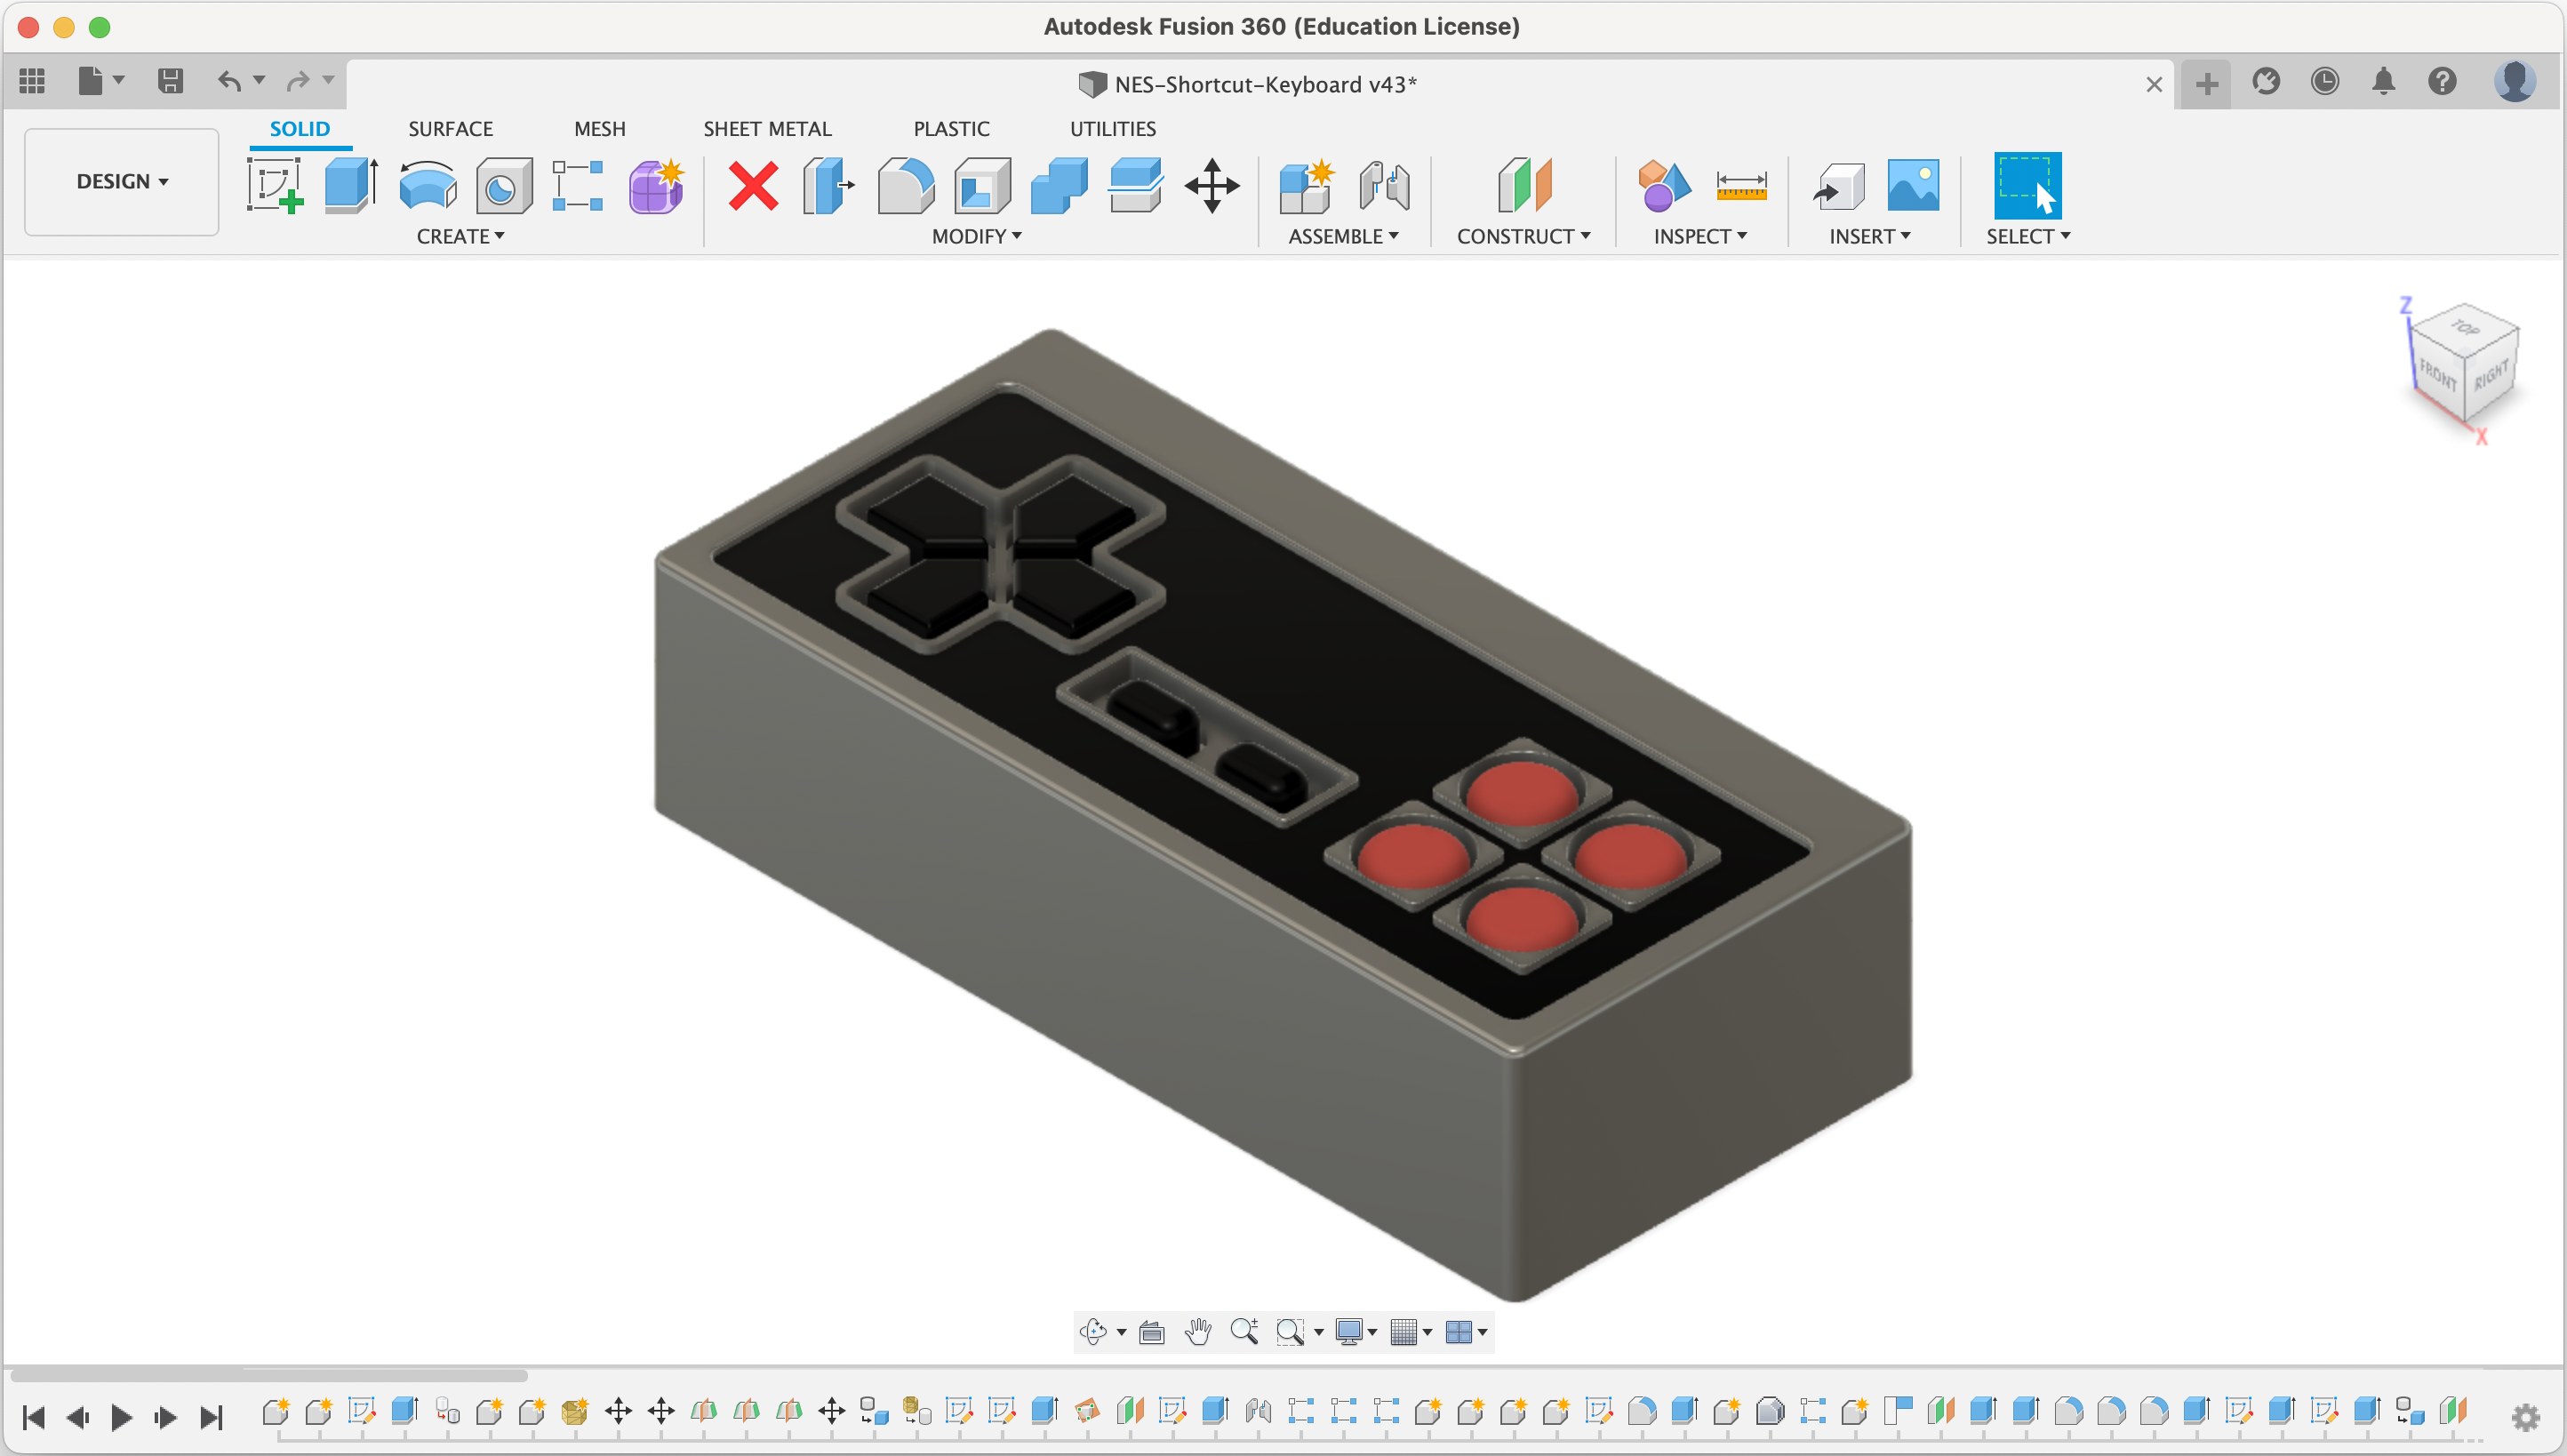 3d model of the controller containing all of the keys and the Adafruit Feather. There are 10 keys arranged to look like an NES controller, which has a gray case with a black top face.